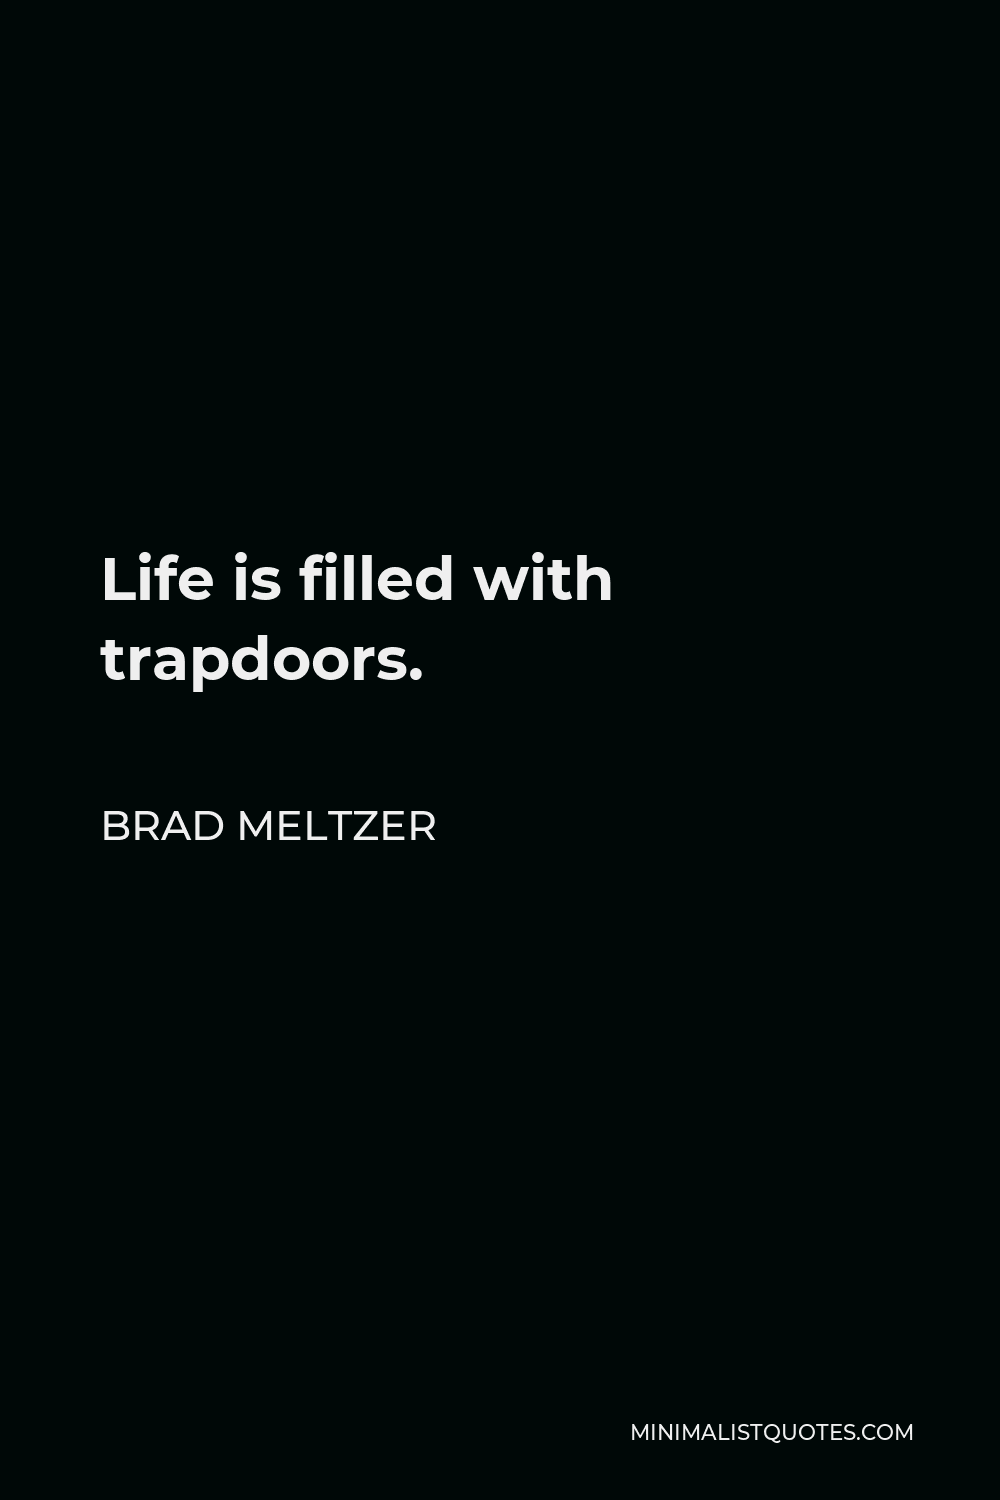 Brad Meltzer Quote - Life is filled with trapdoors.